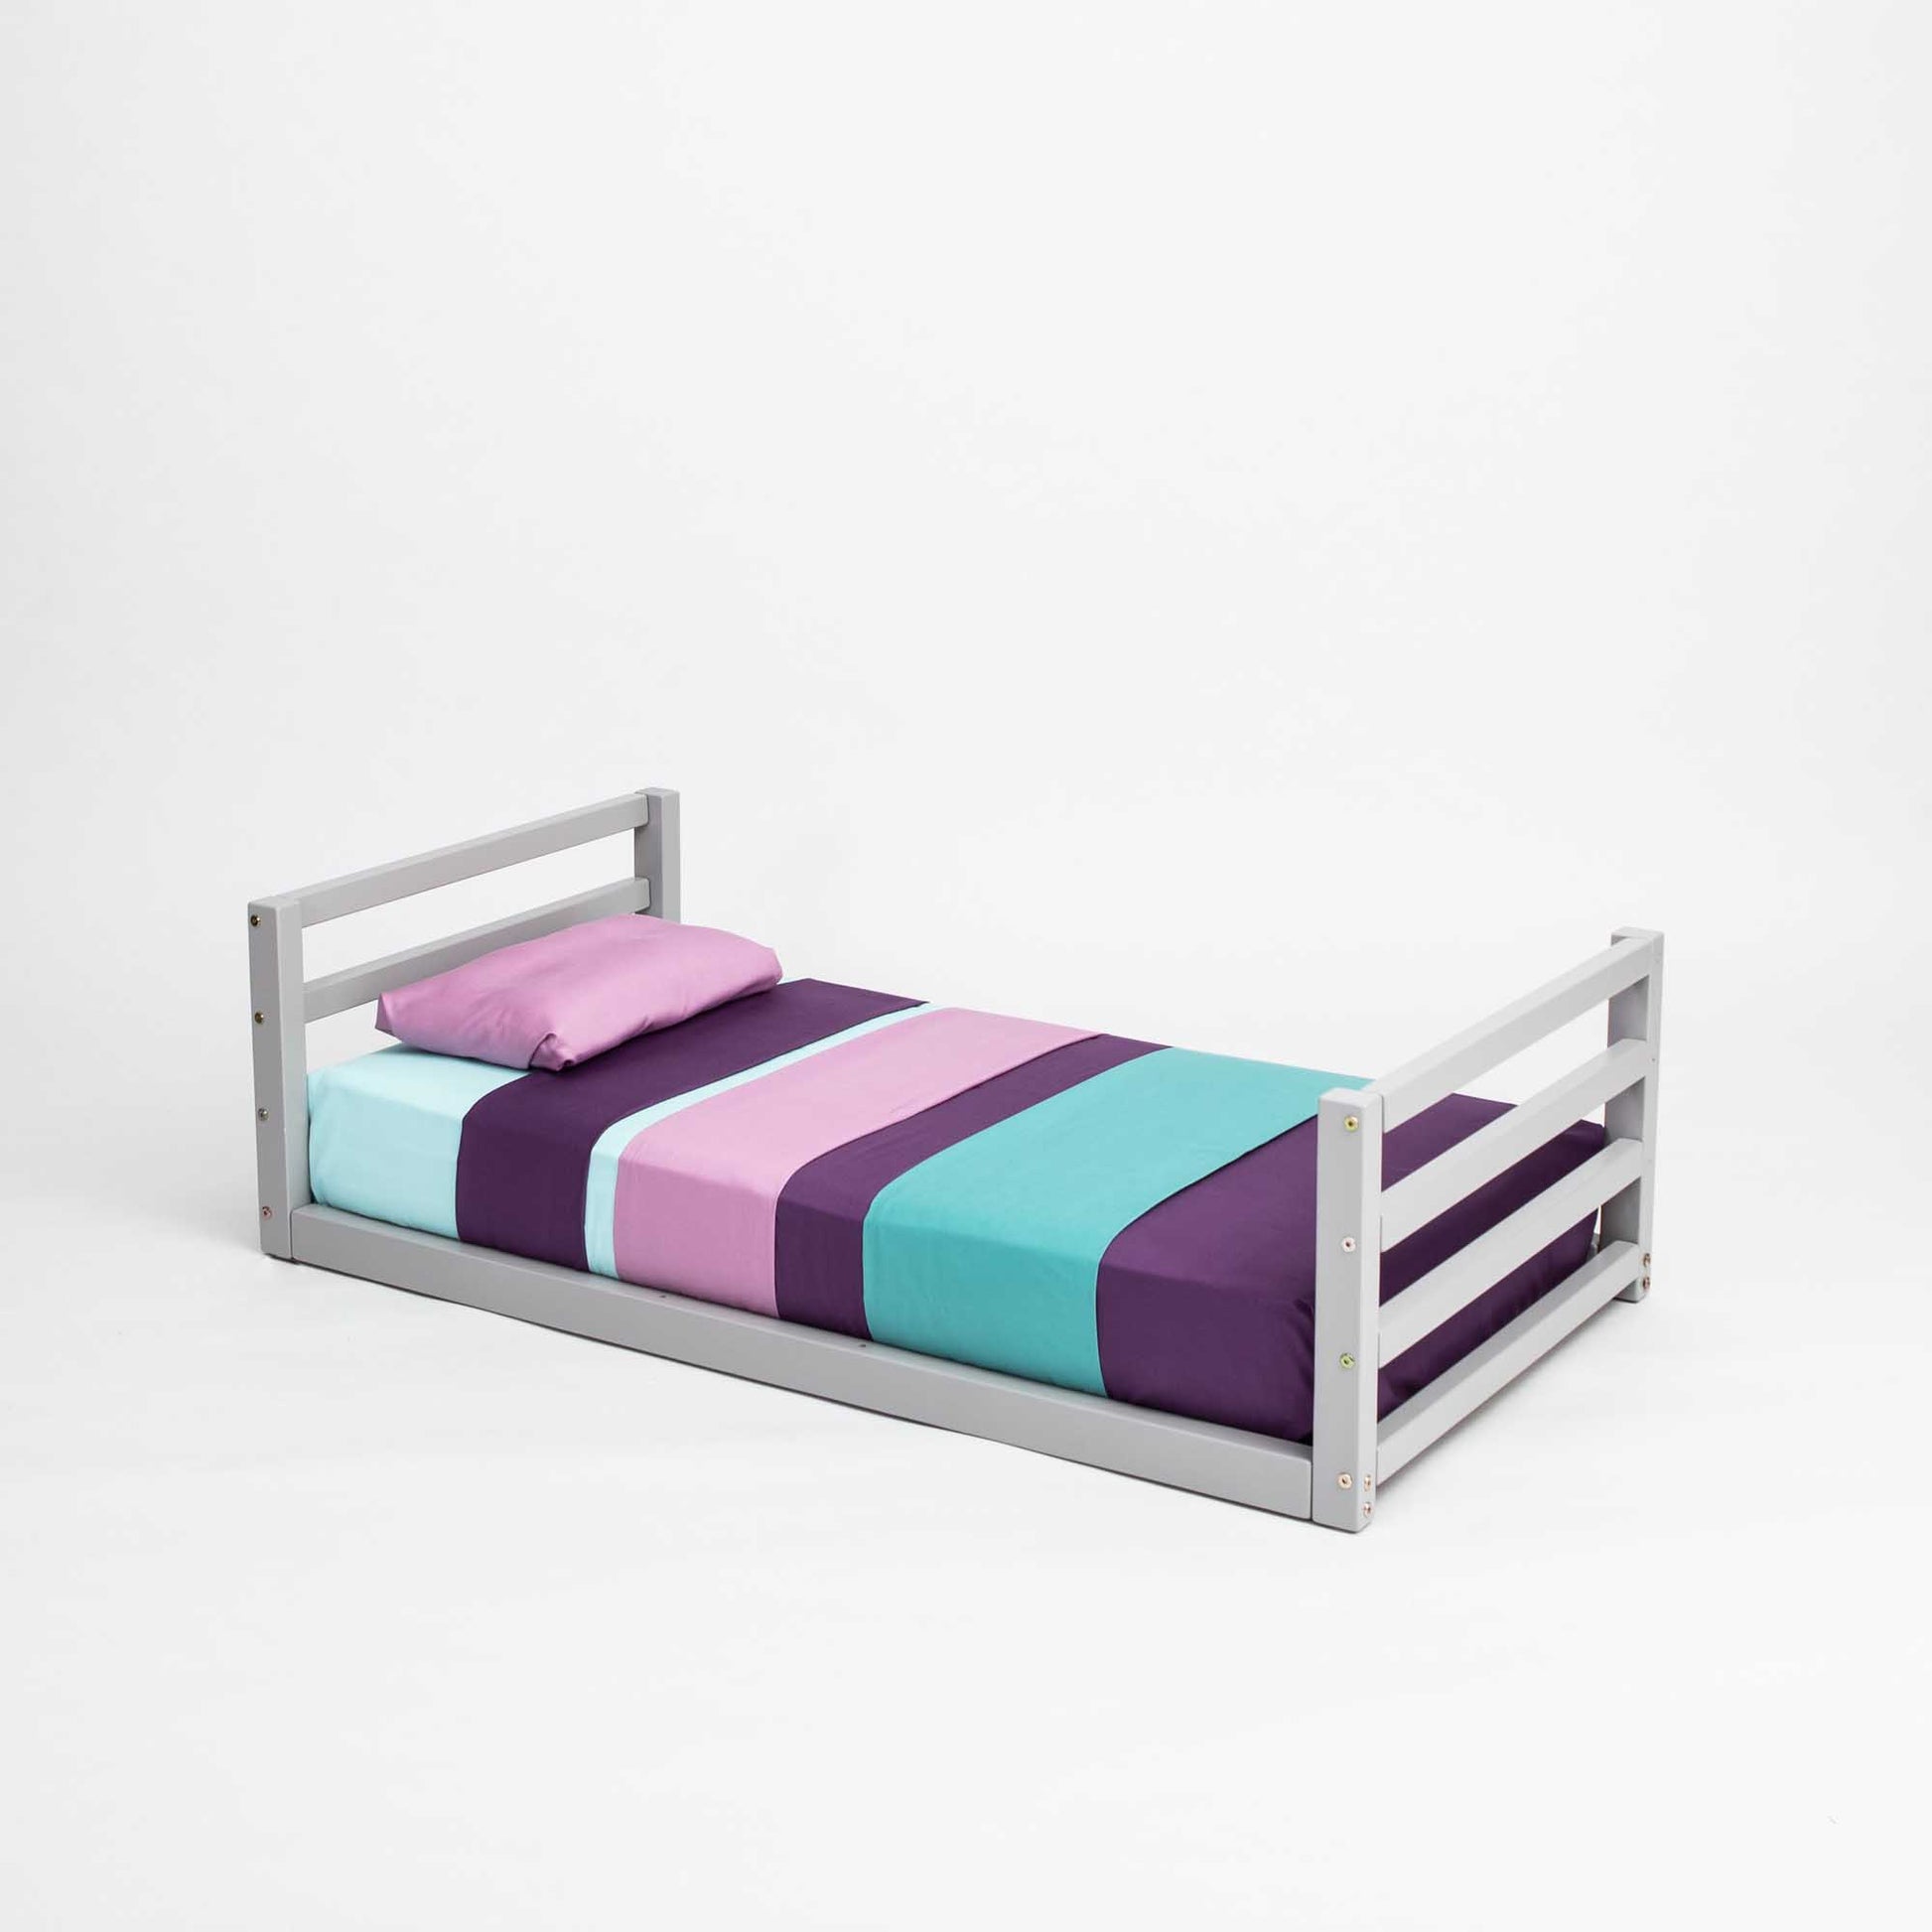 A Sweet Home From Wood toddler floor bed with a horizontal rail headboard and footboard, with a purple, blue, and green striped sheet.